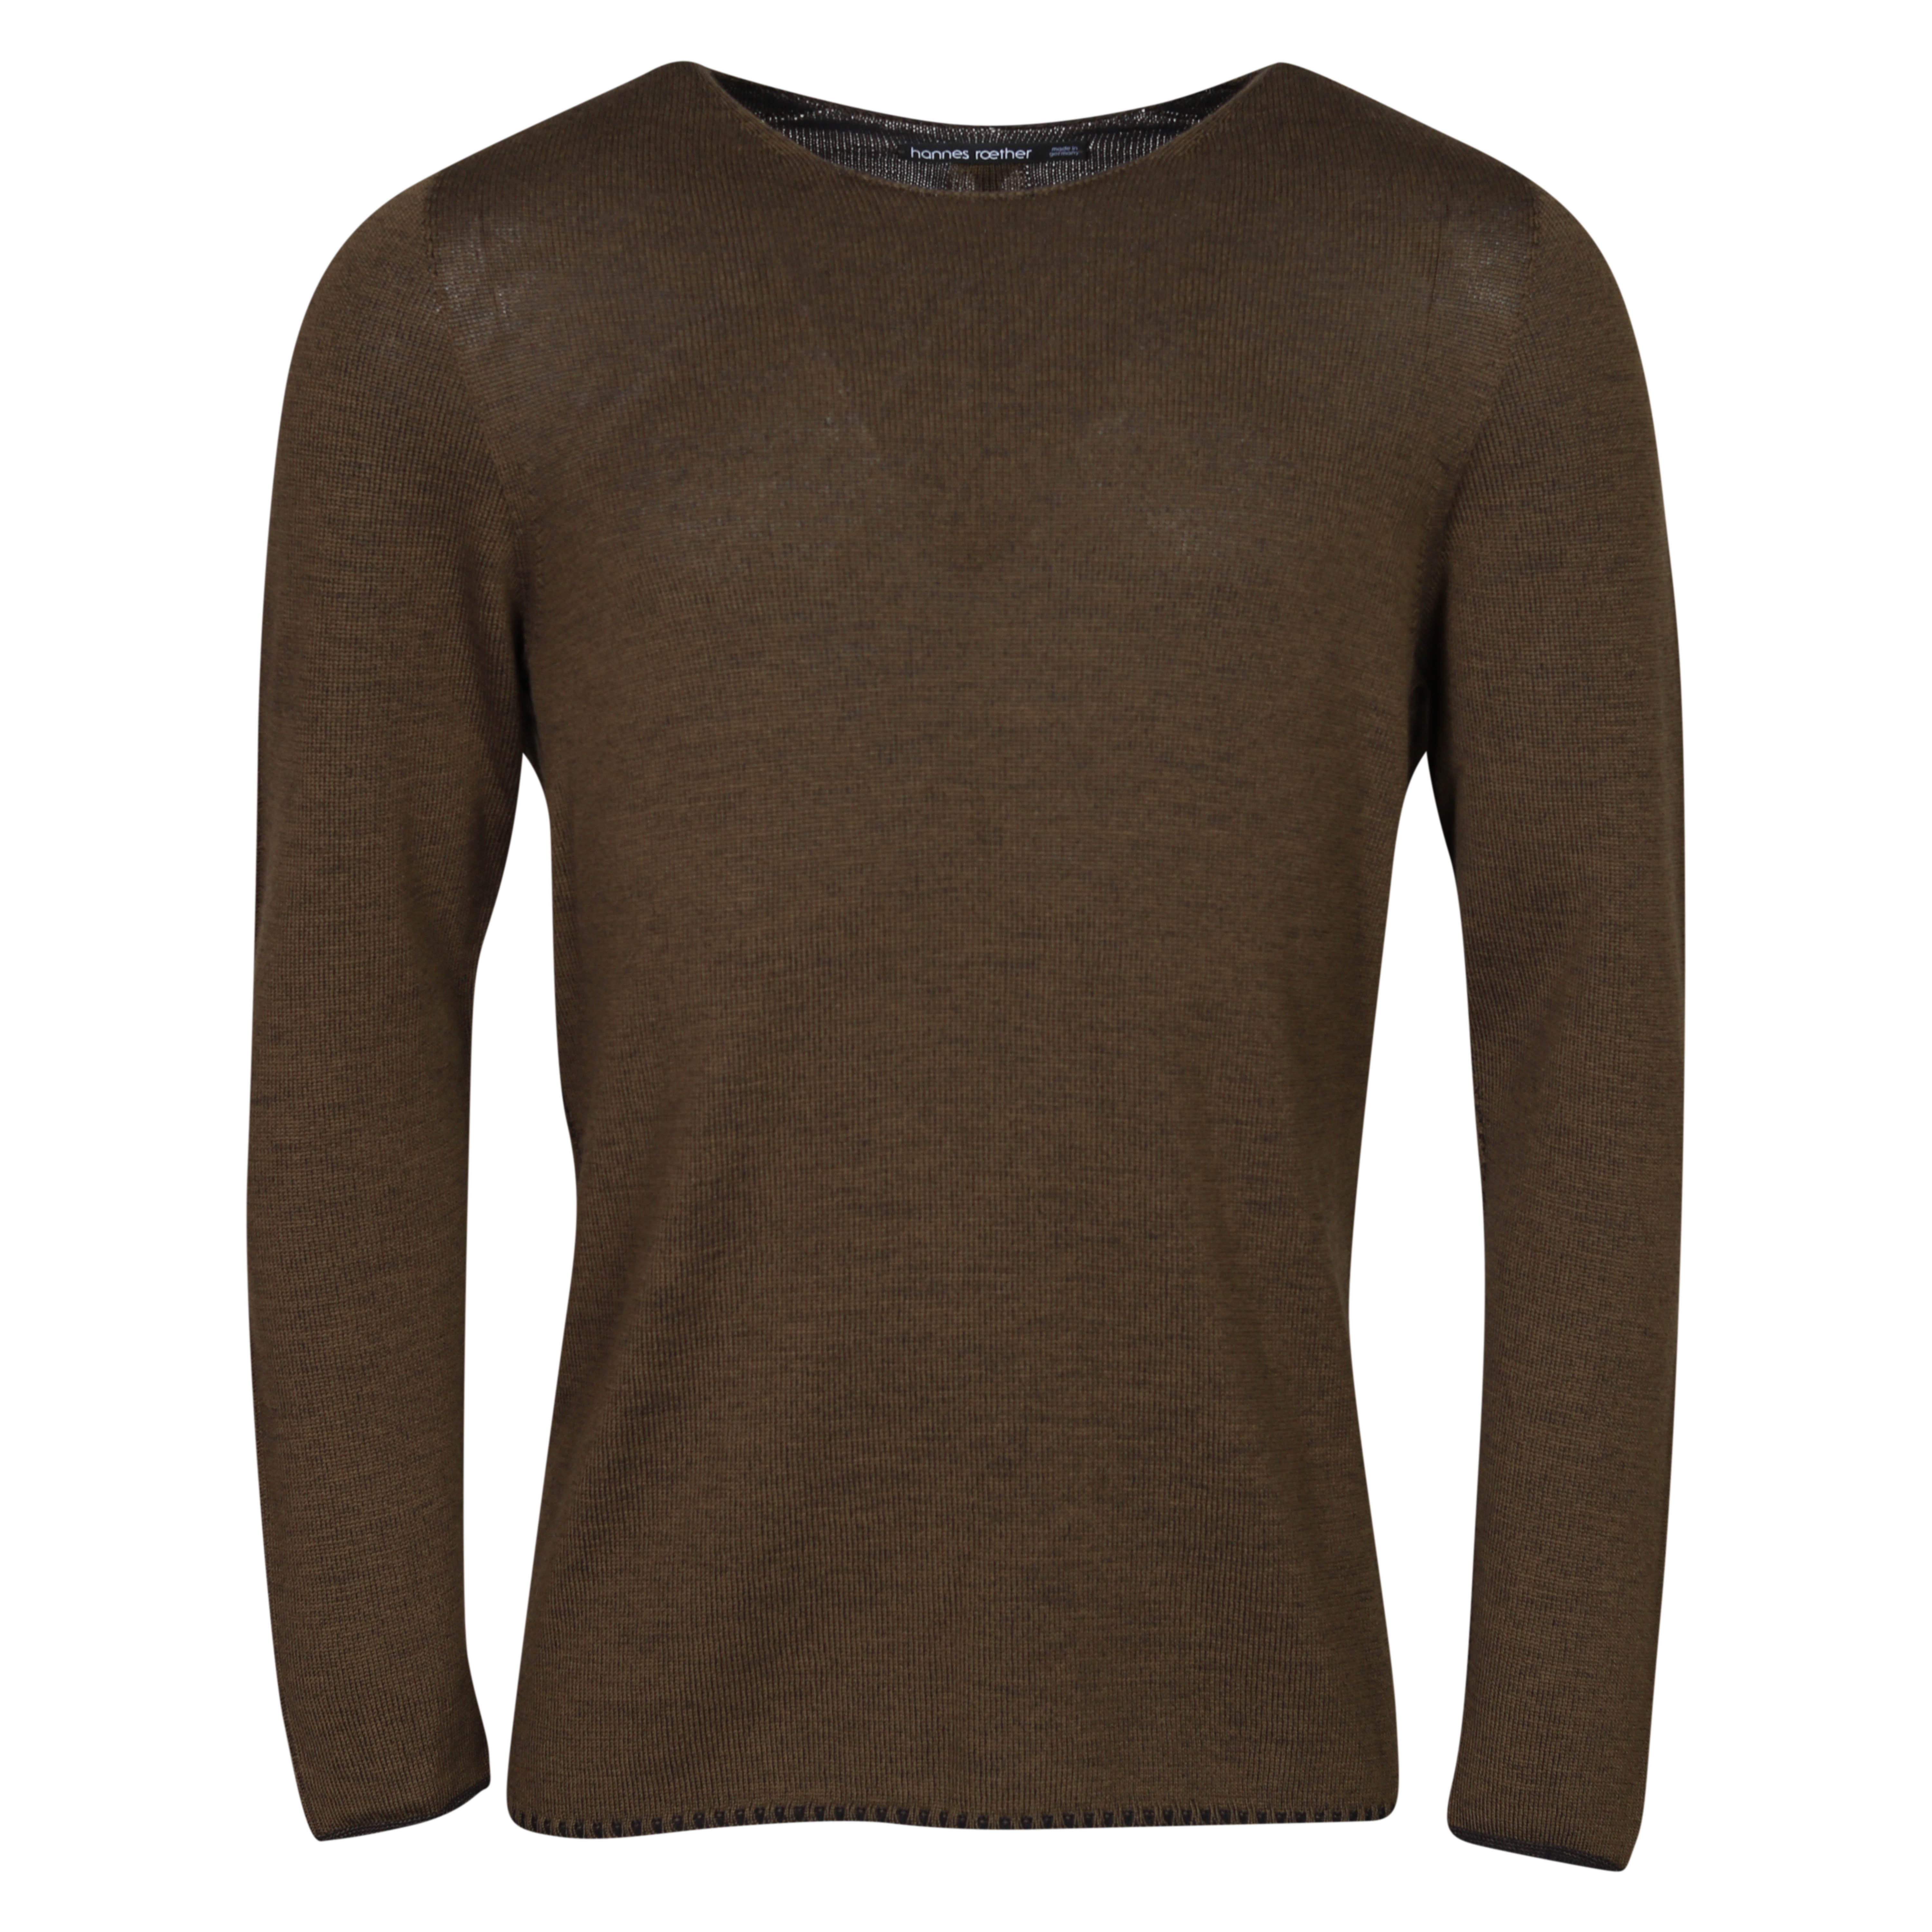 Hannes Roether Knit Sweater in Brown Melange